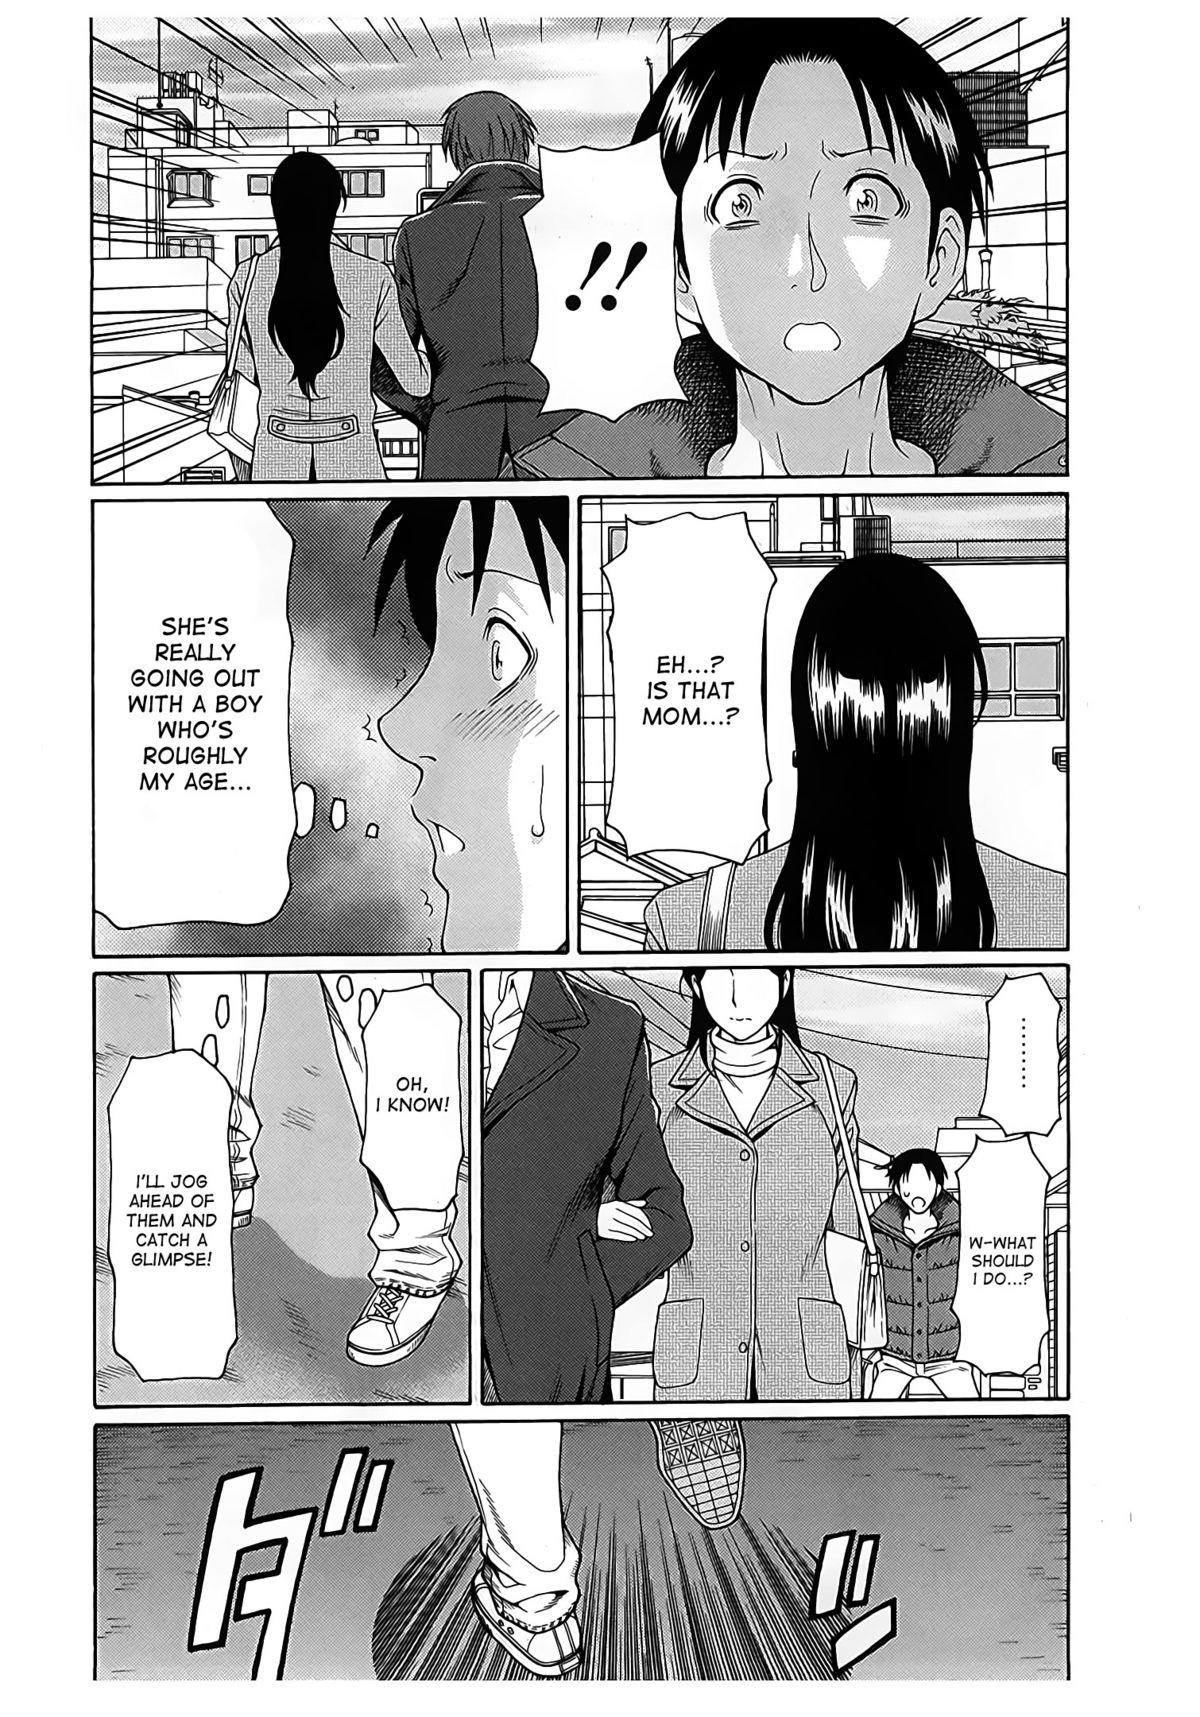 Indoor Ingi no Hate 2 Ch. 1-6 Caught - Page 11